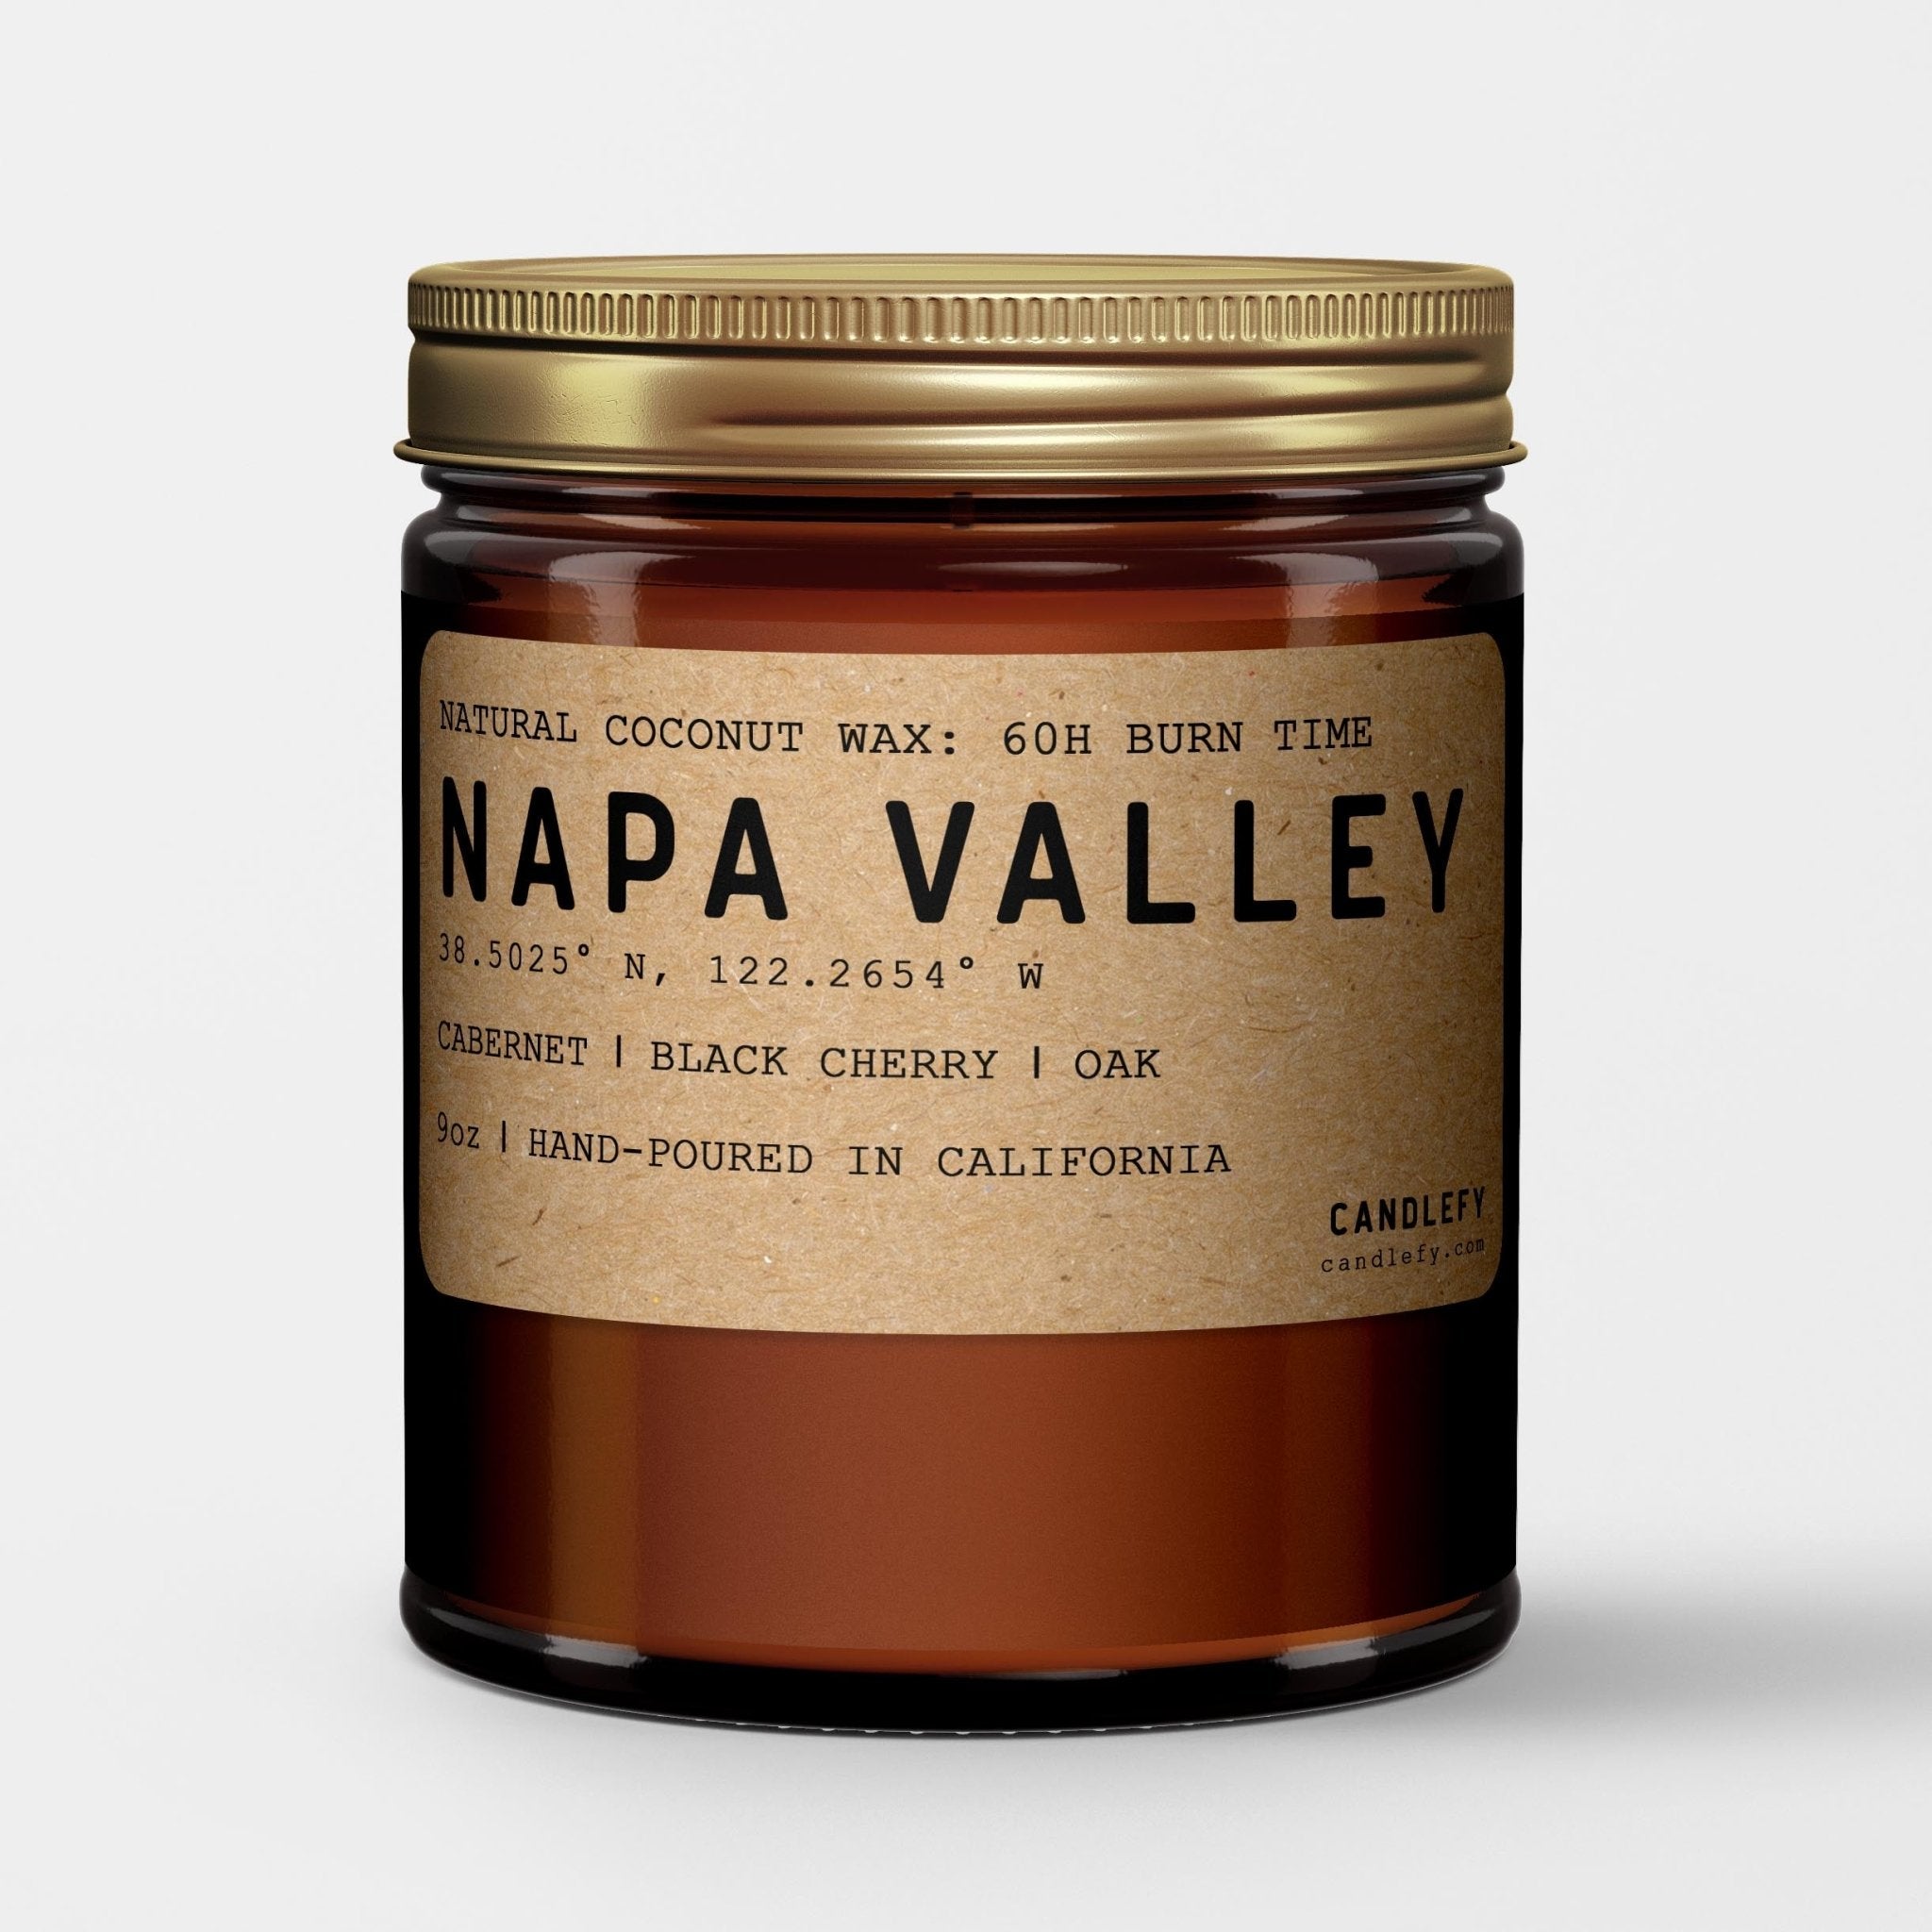 Napa Valley California Scented Candle (Cabernet, Black Cherry, French Oak) - Candlefy